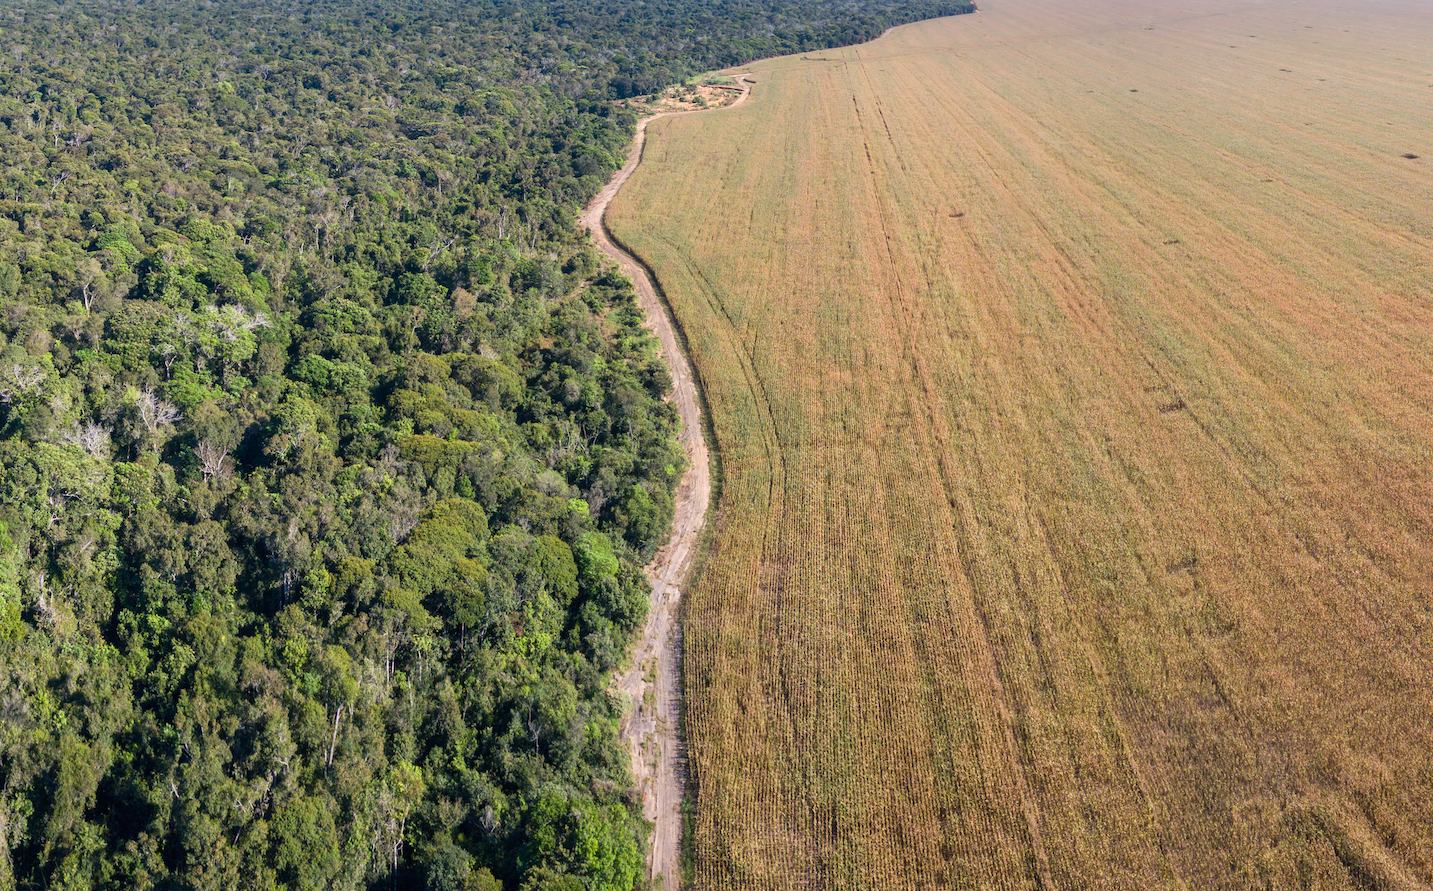 Aerial view of Xingu Indigenous Park territory and soybean farms in Mato Grosso. Image courtesy of Shutterstock. Brazil, date unknown.